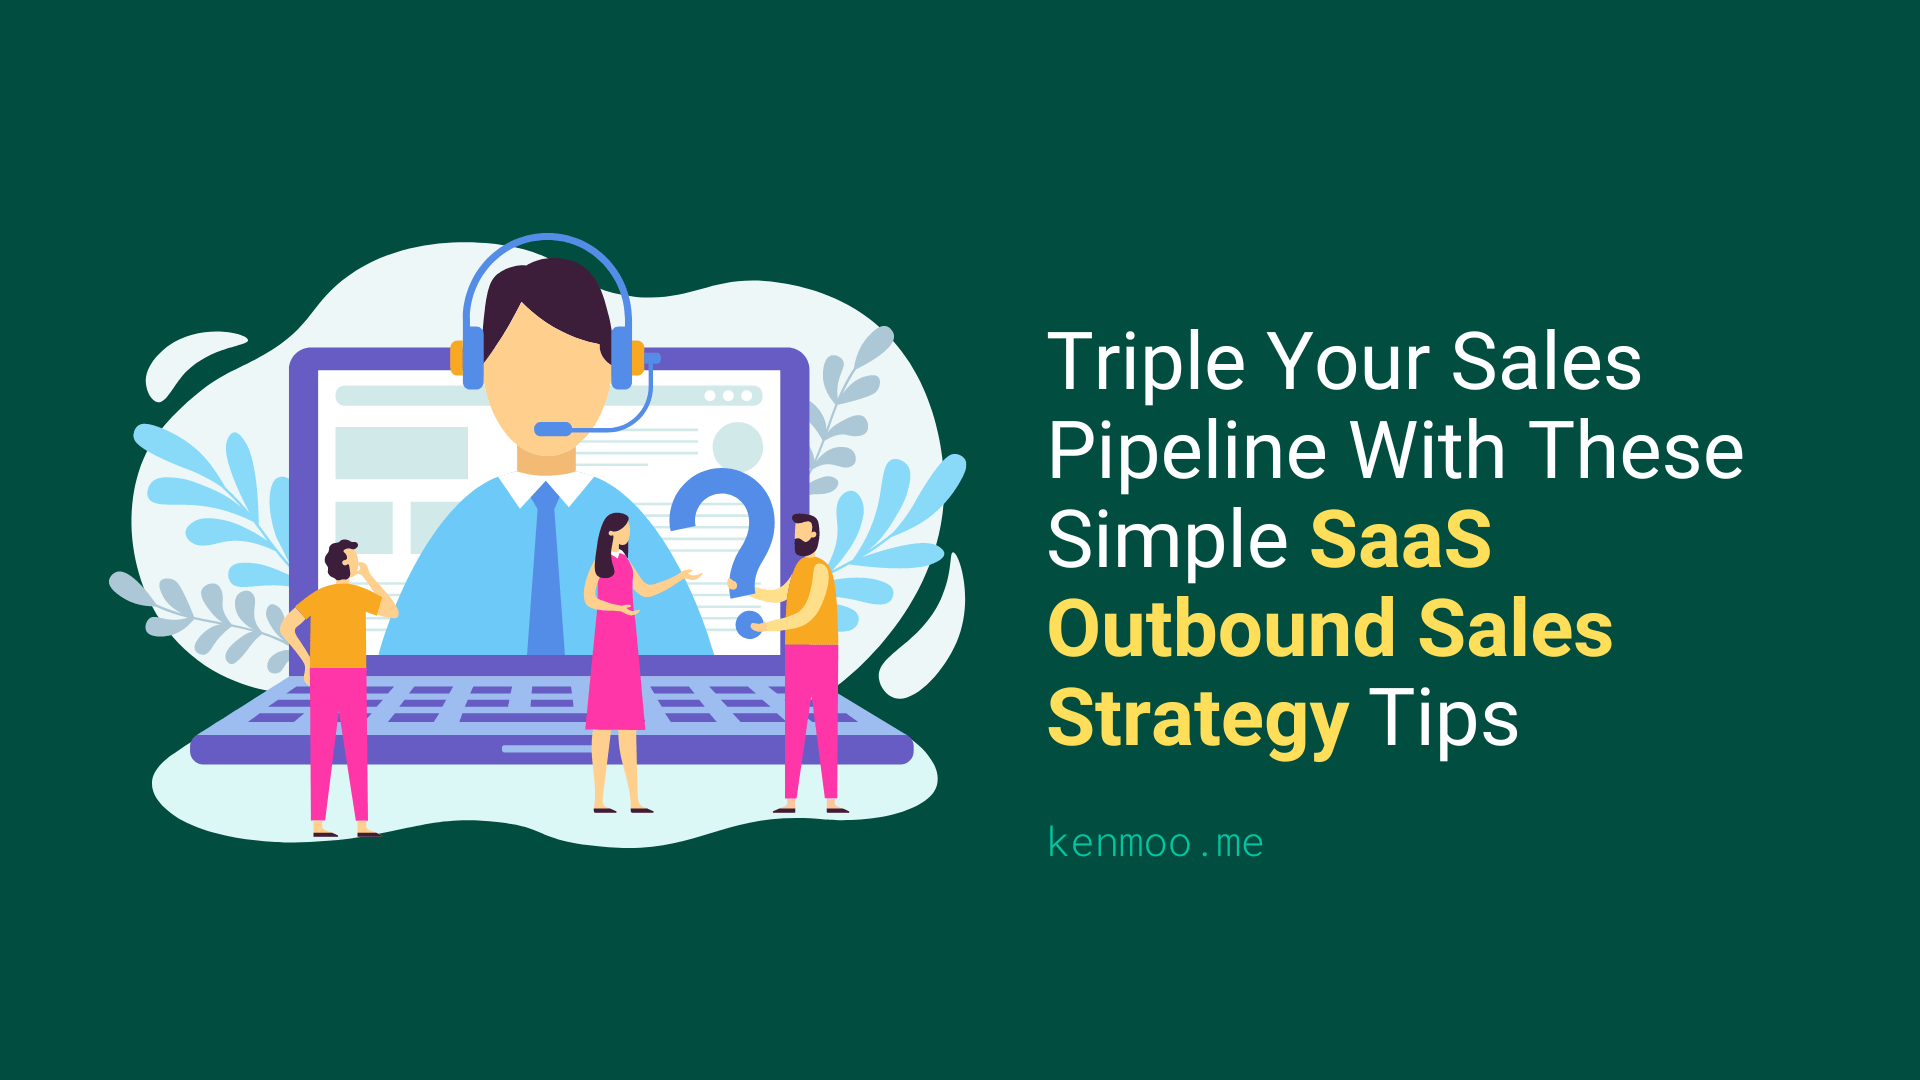 SaaS Outbound Sales Strategy to Triple Your Sales